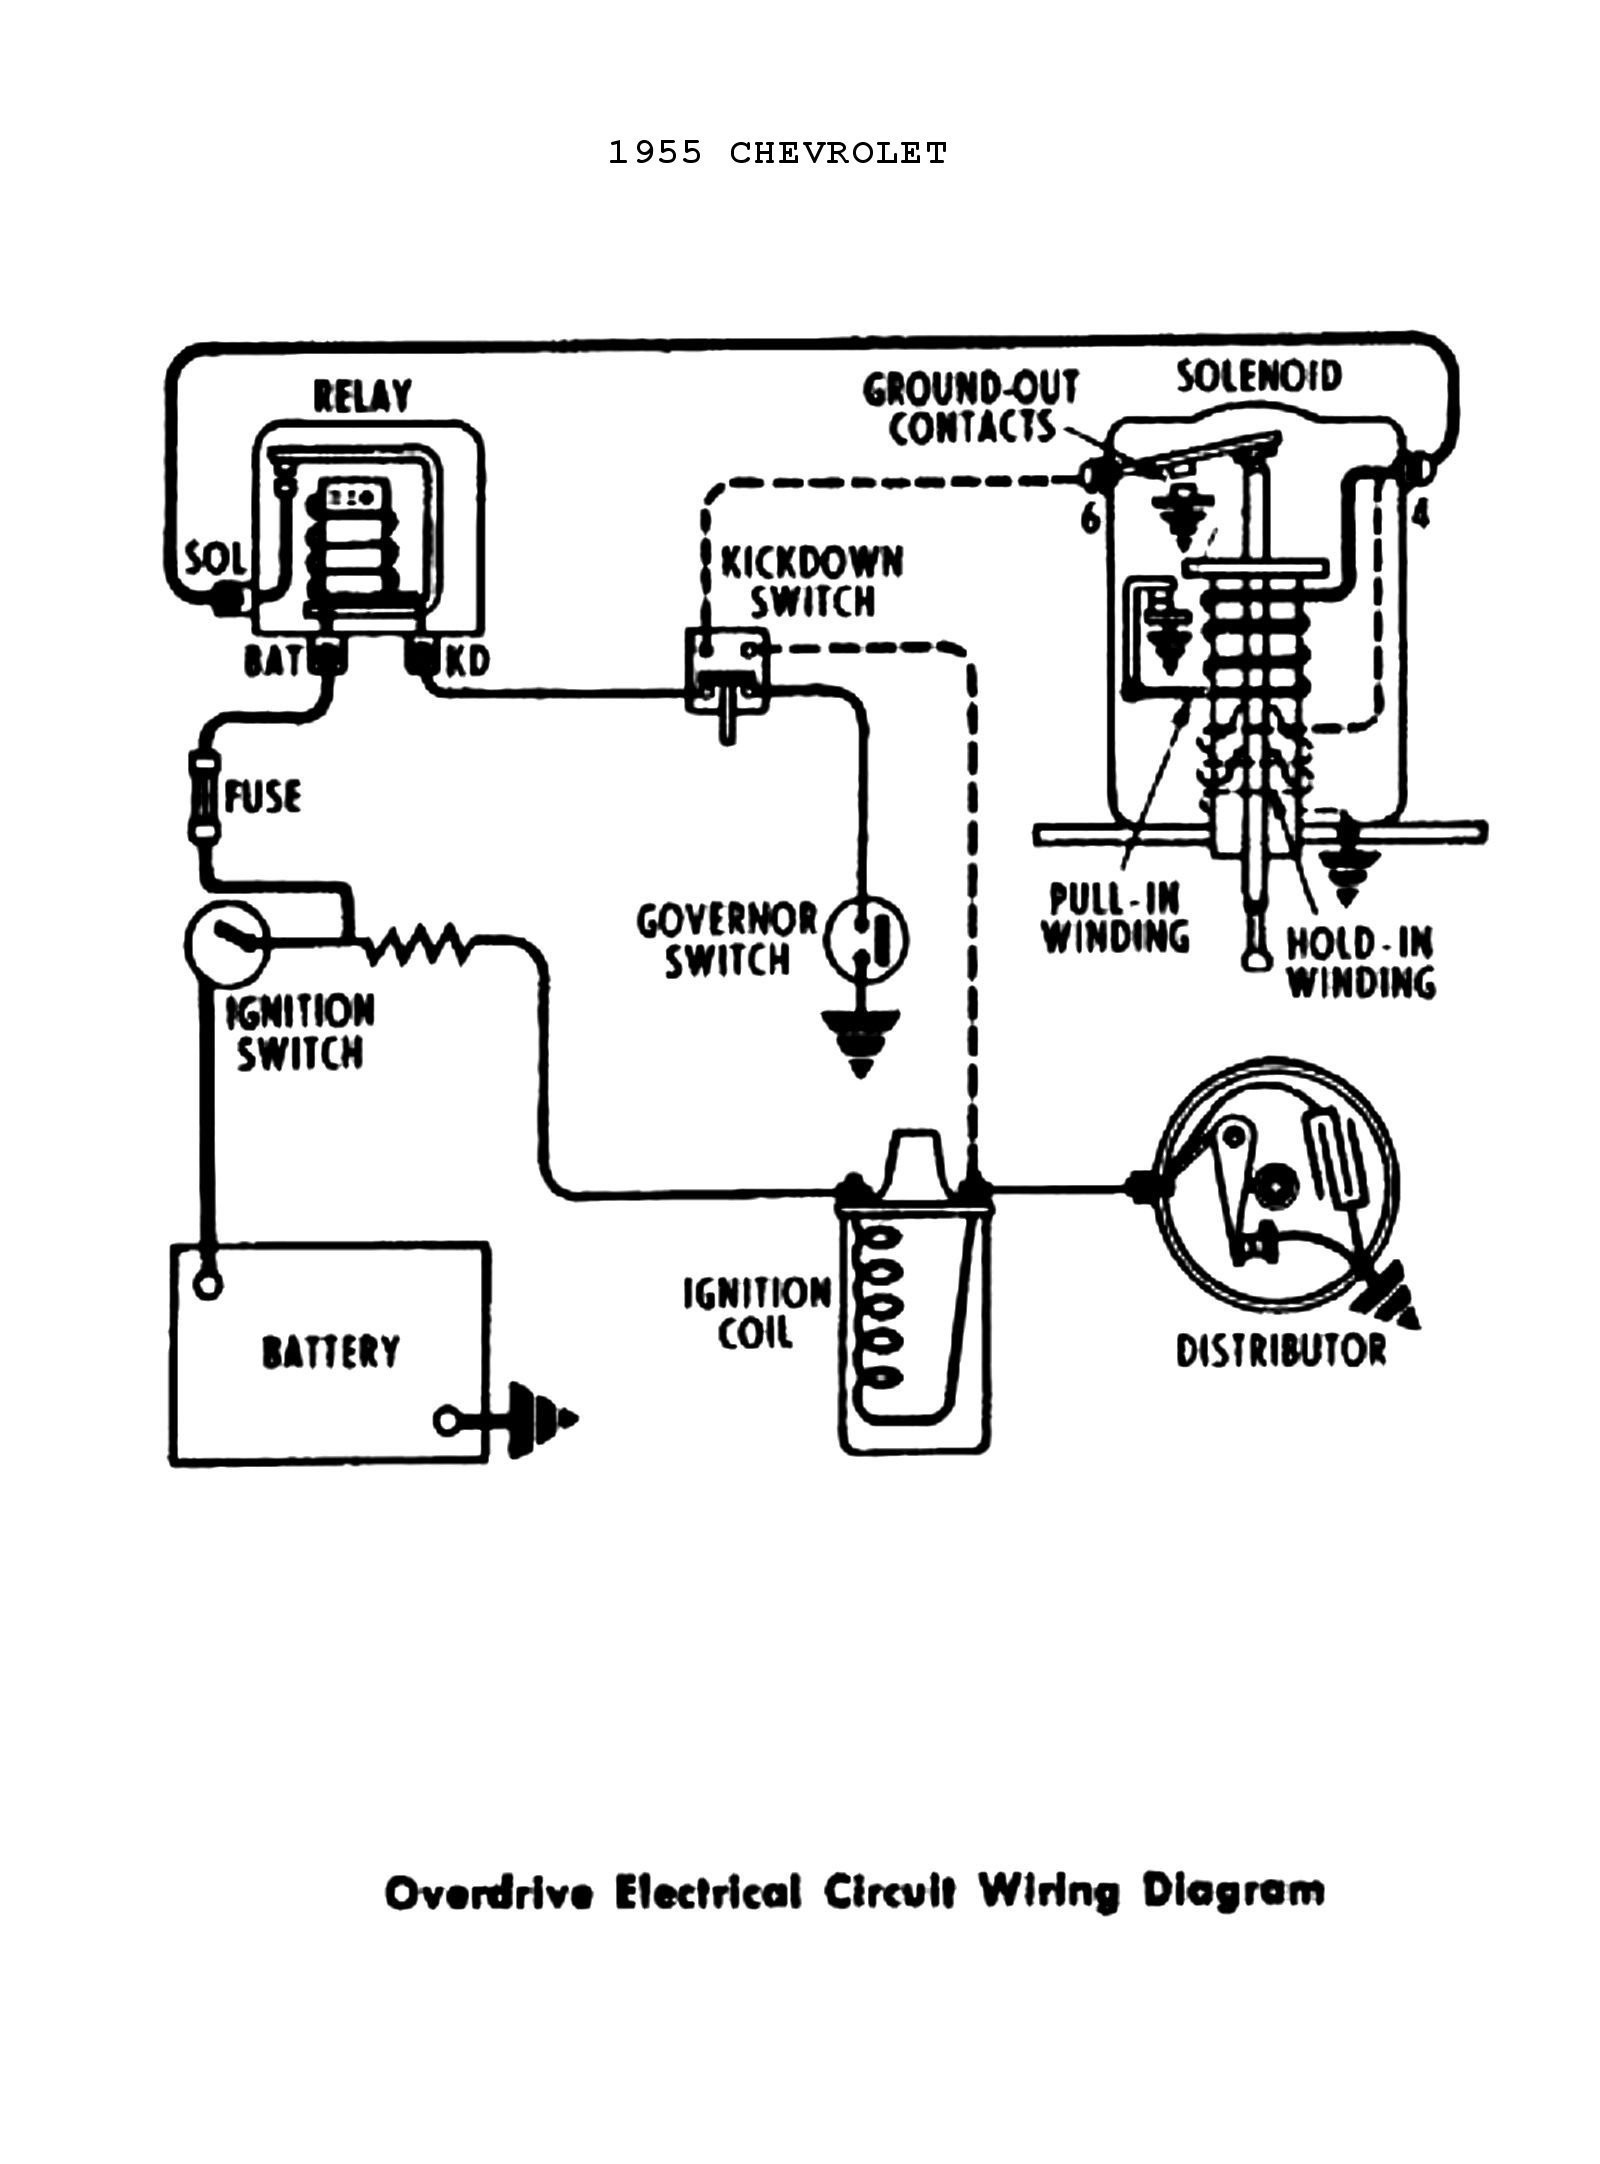 Gm Relay Wiring Diagram Refrence Ignition Coil Wiring Diagram Gallery